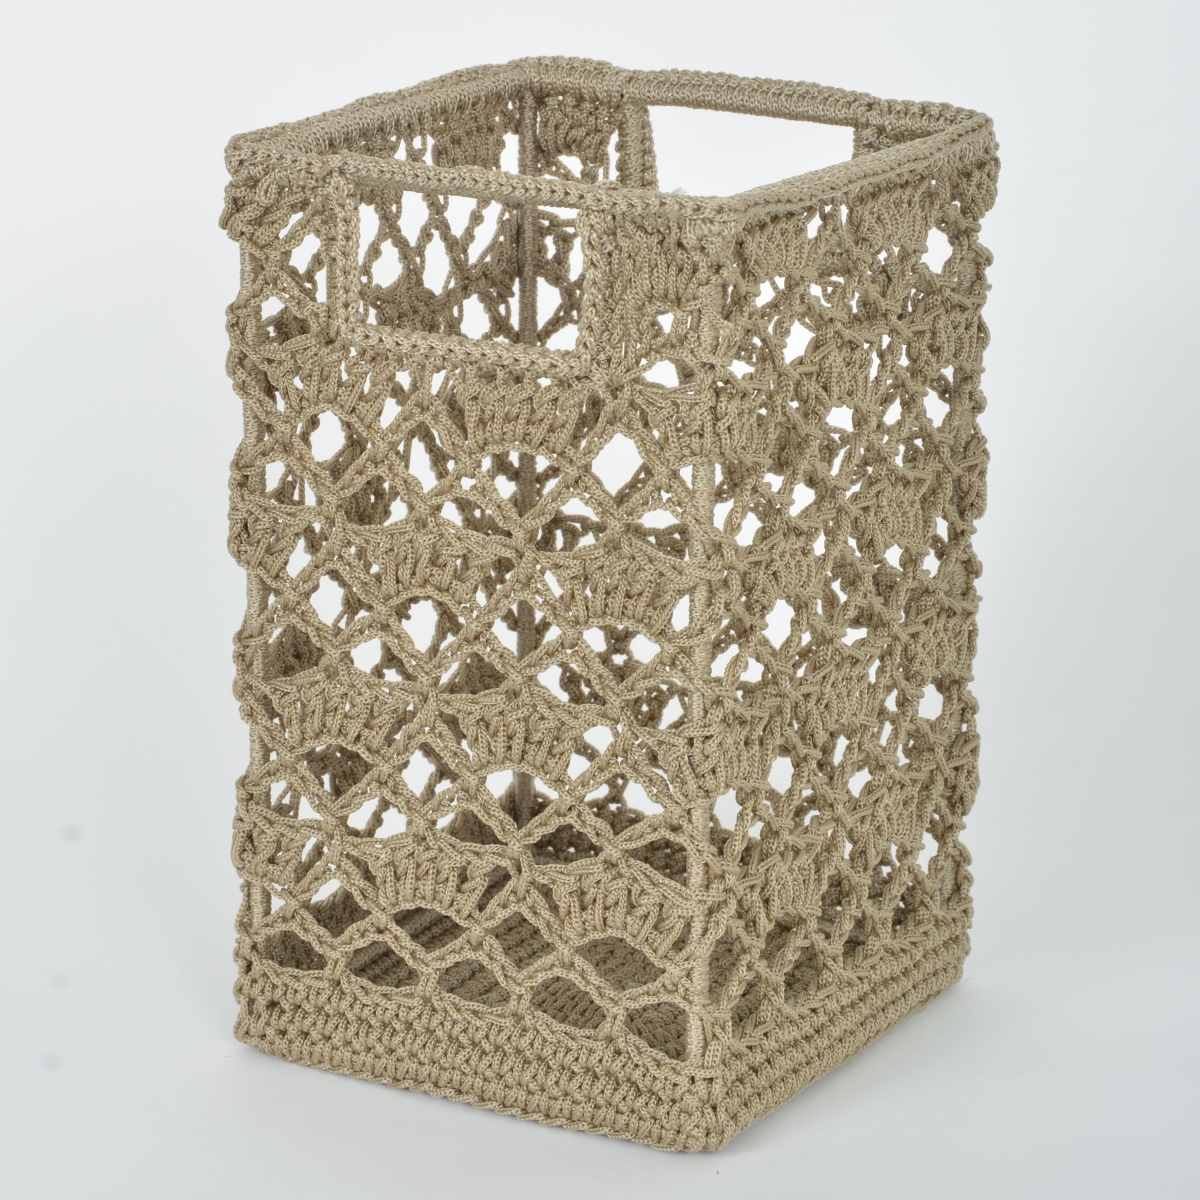 Picture of Heritage Lace MC-1125TN Mode Crochet Basket, Tan - 9 x 5.5 x 5.5 in.